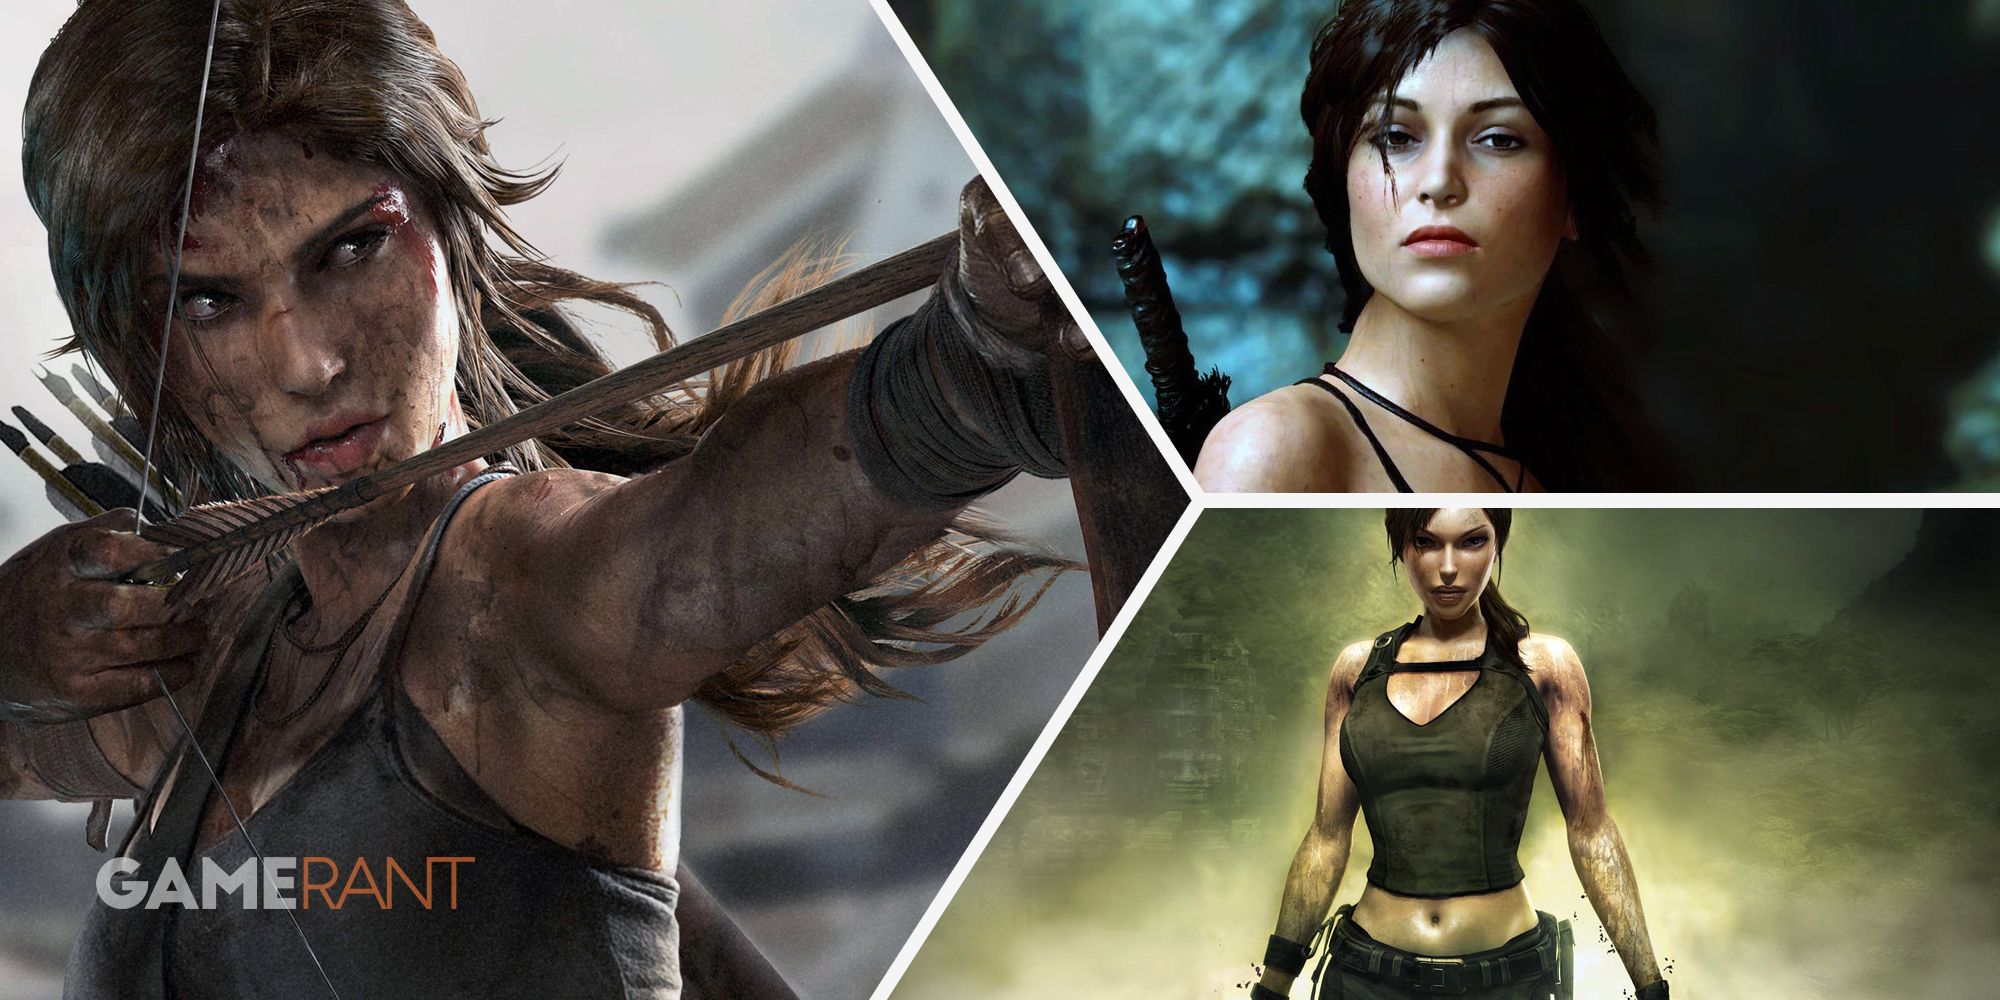 Lara Croft holding a bow and arrow on left, Lara Croft on top right, Lara Croft in Tomb Raider Underworld on bottom right